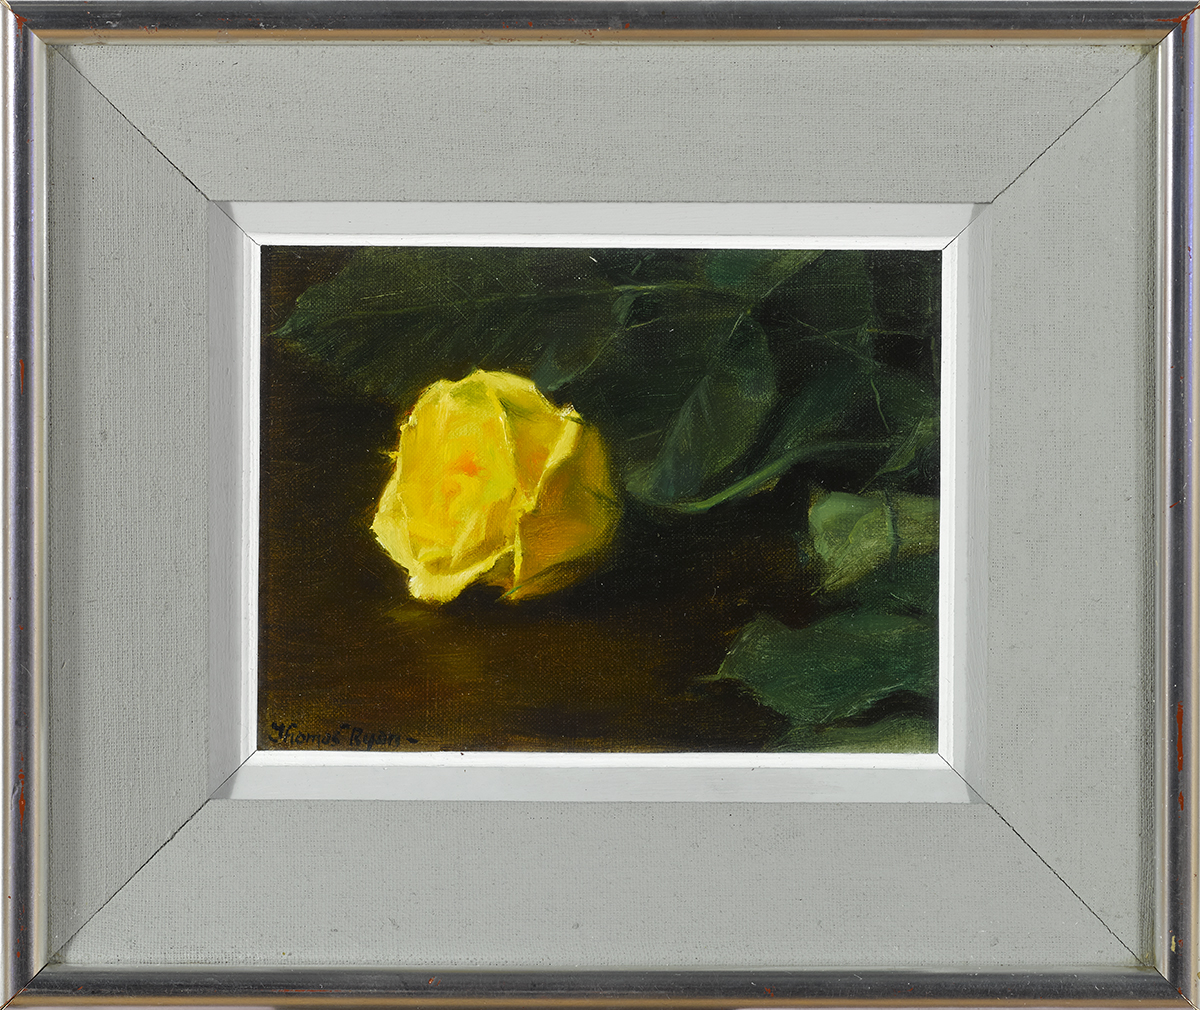 Thomas Ryan PPRHA (b.1929)YELLOW ROSE, 1981 oil on canvas laid on board signed lower right; - Image 2 of 3